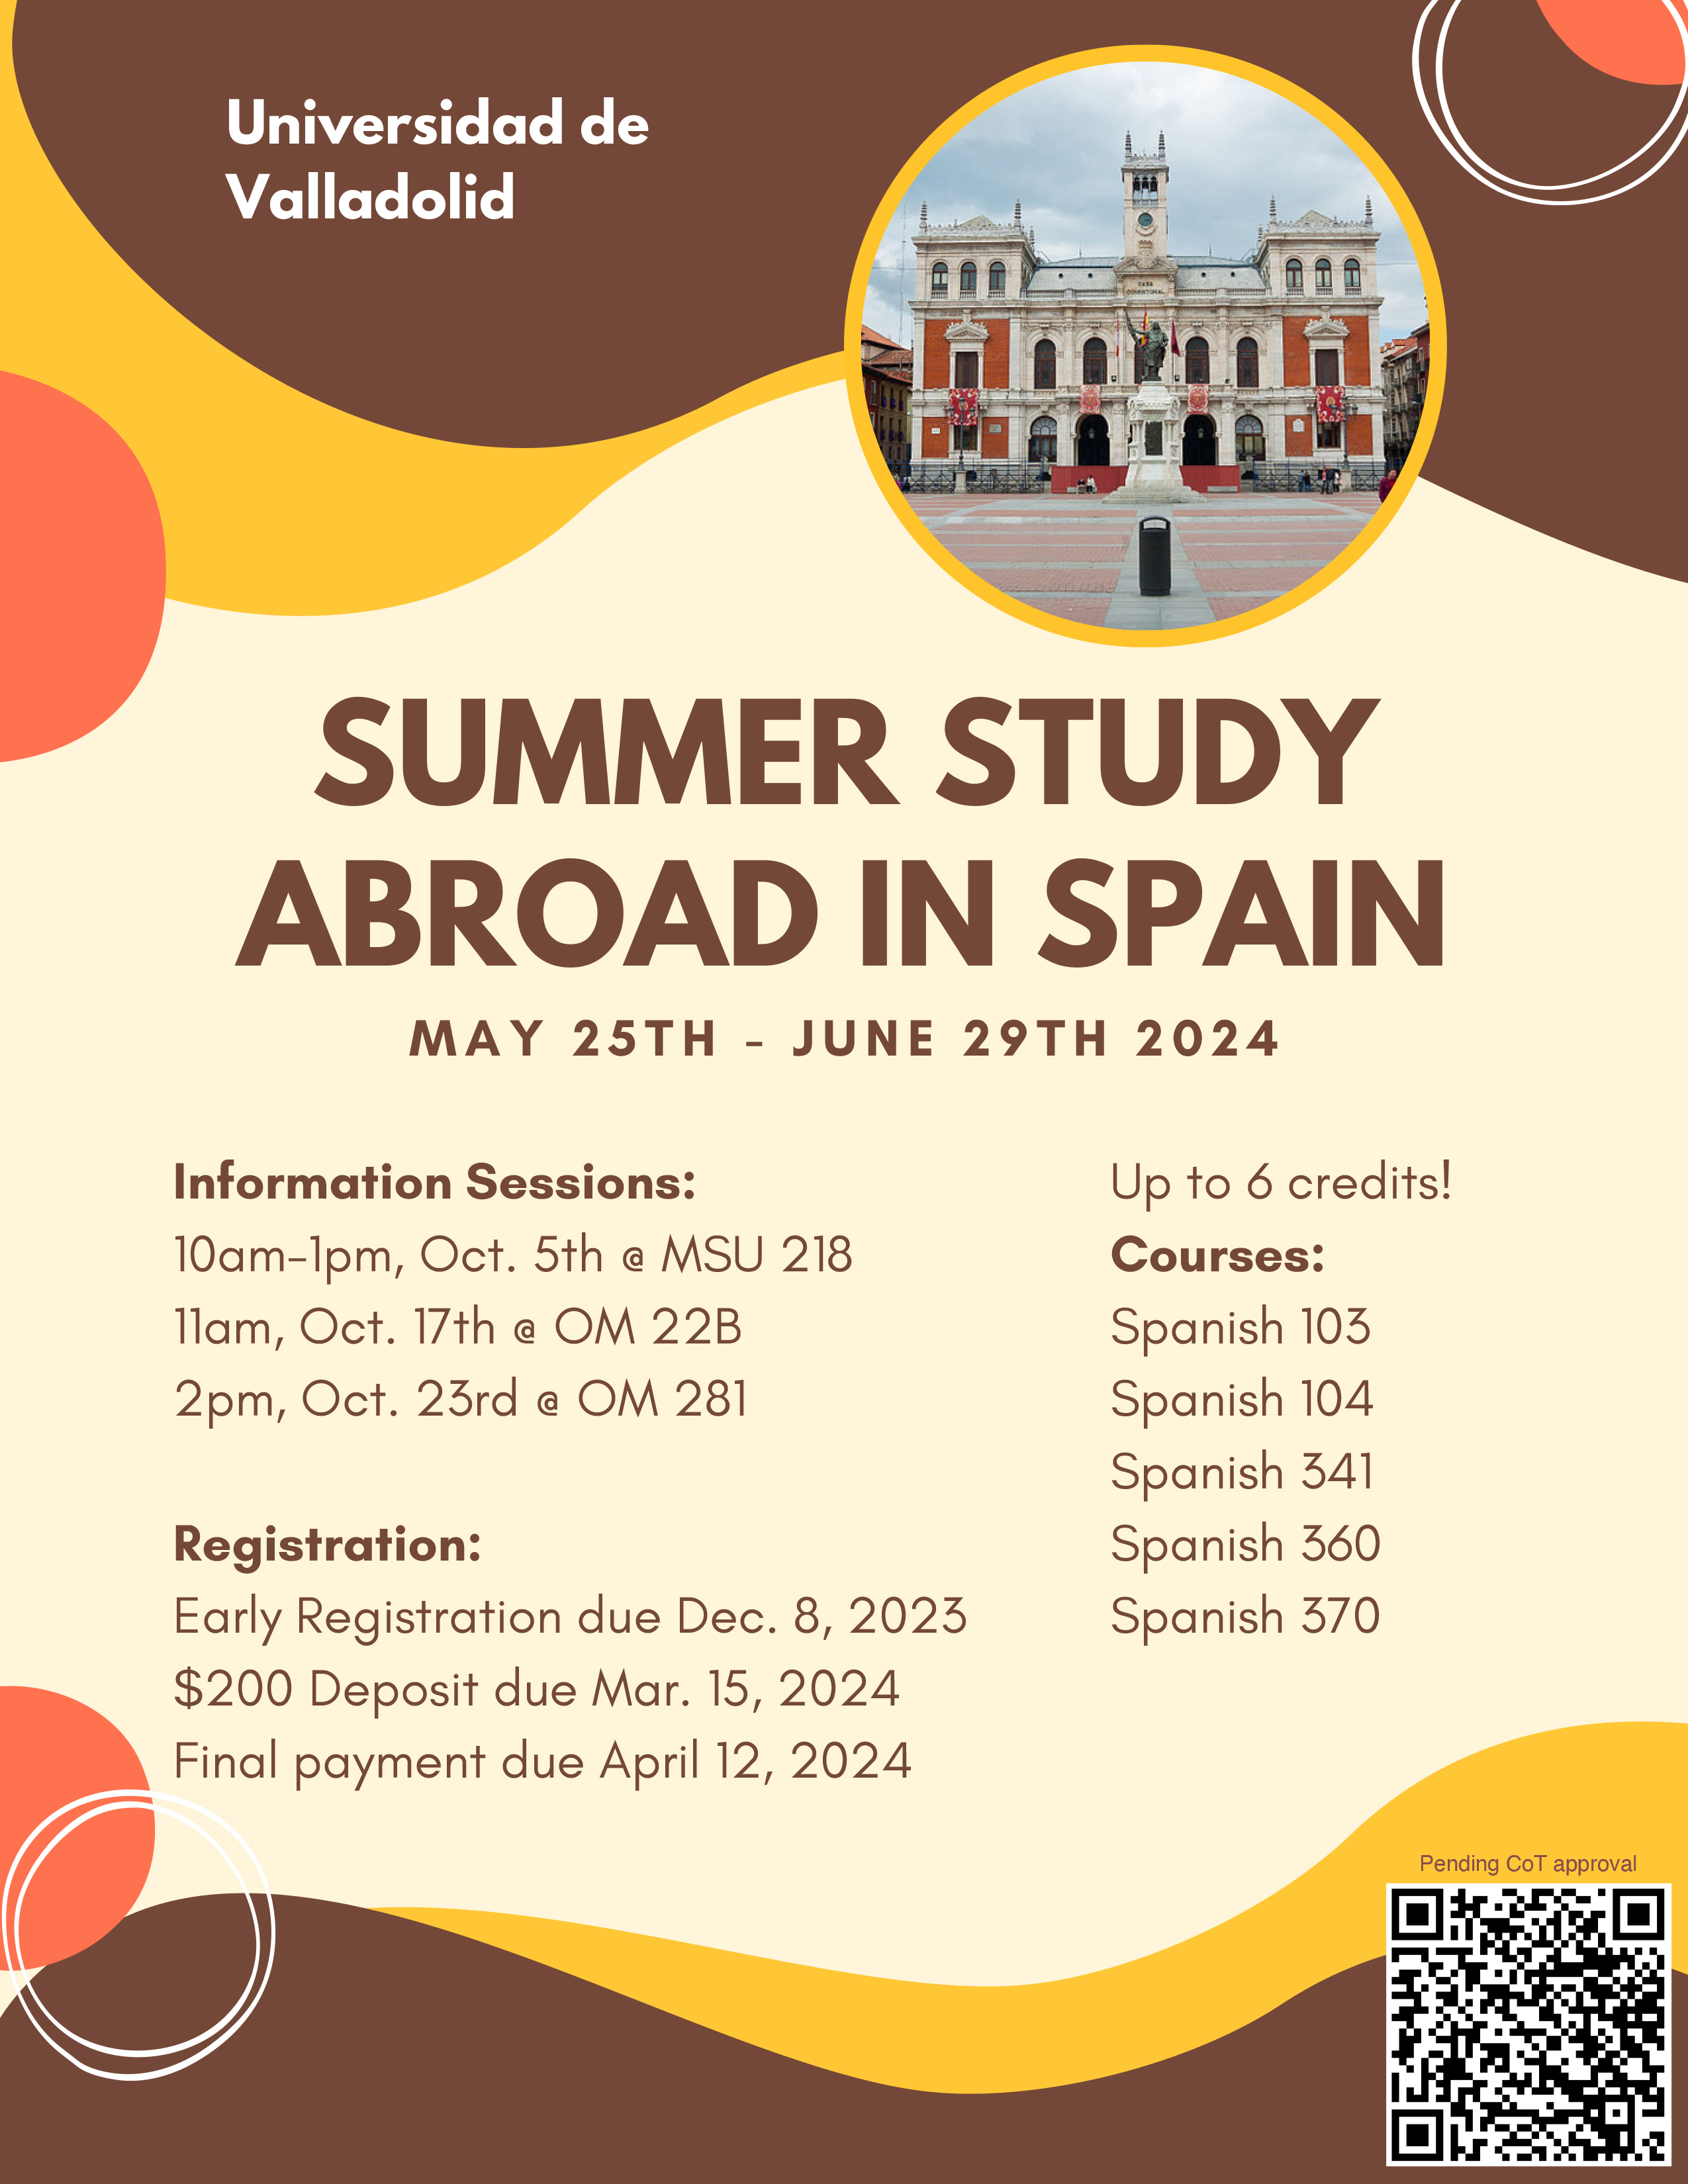 KU offers summer study abroad opportunity in Spain